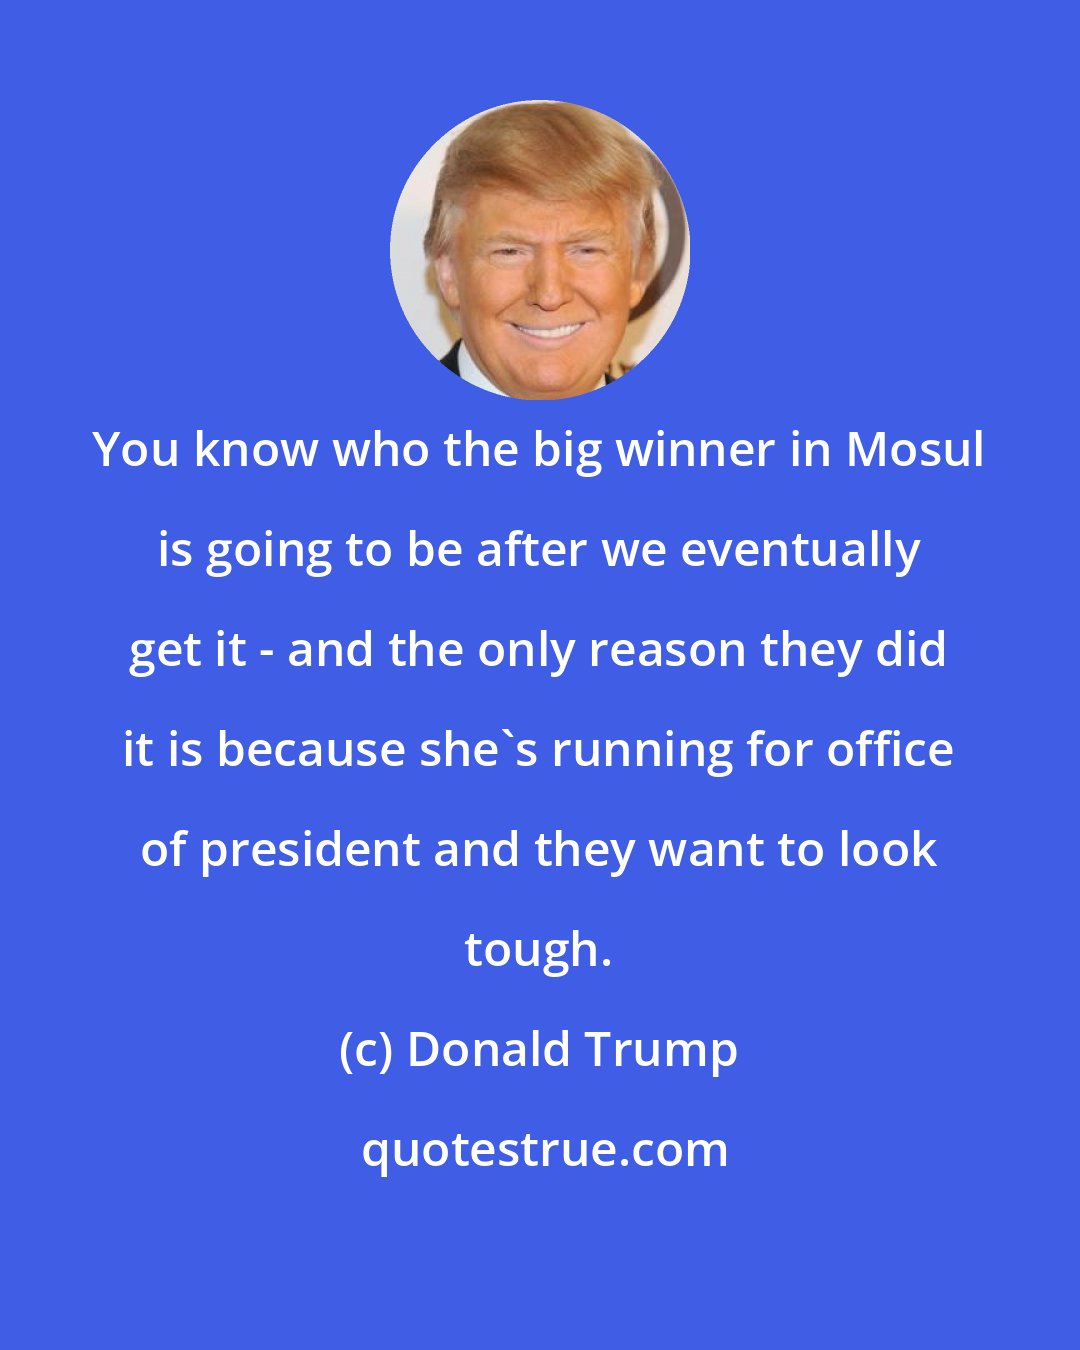 Donald Trump: You know who the big winner in Mosul is going to be after we eventually get it - and the only reason they did it is because she's running for office of president and they want to look tough.